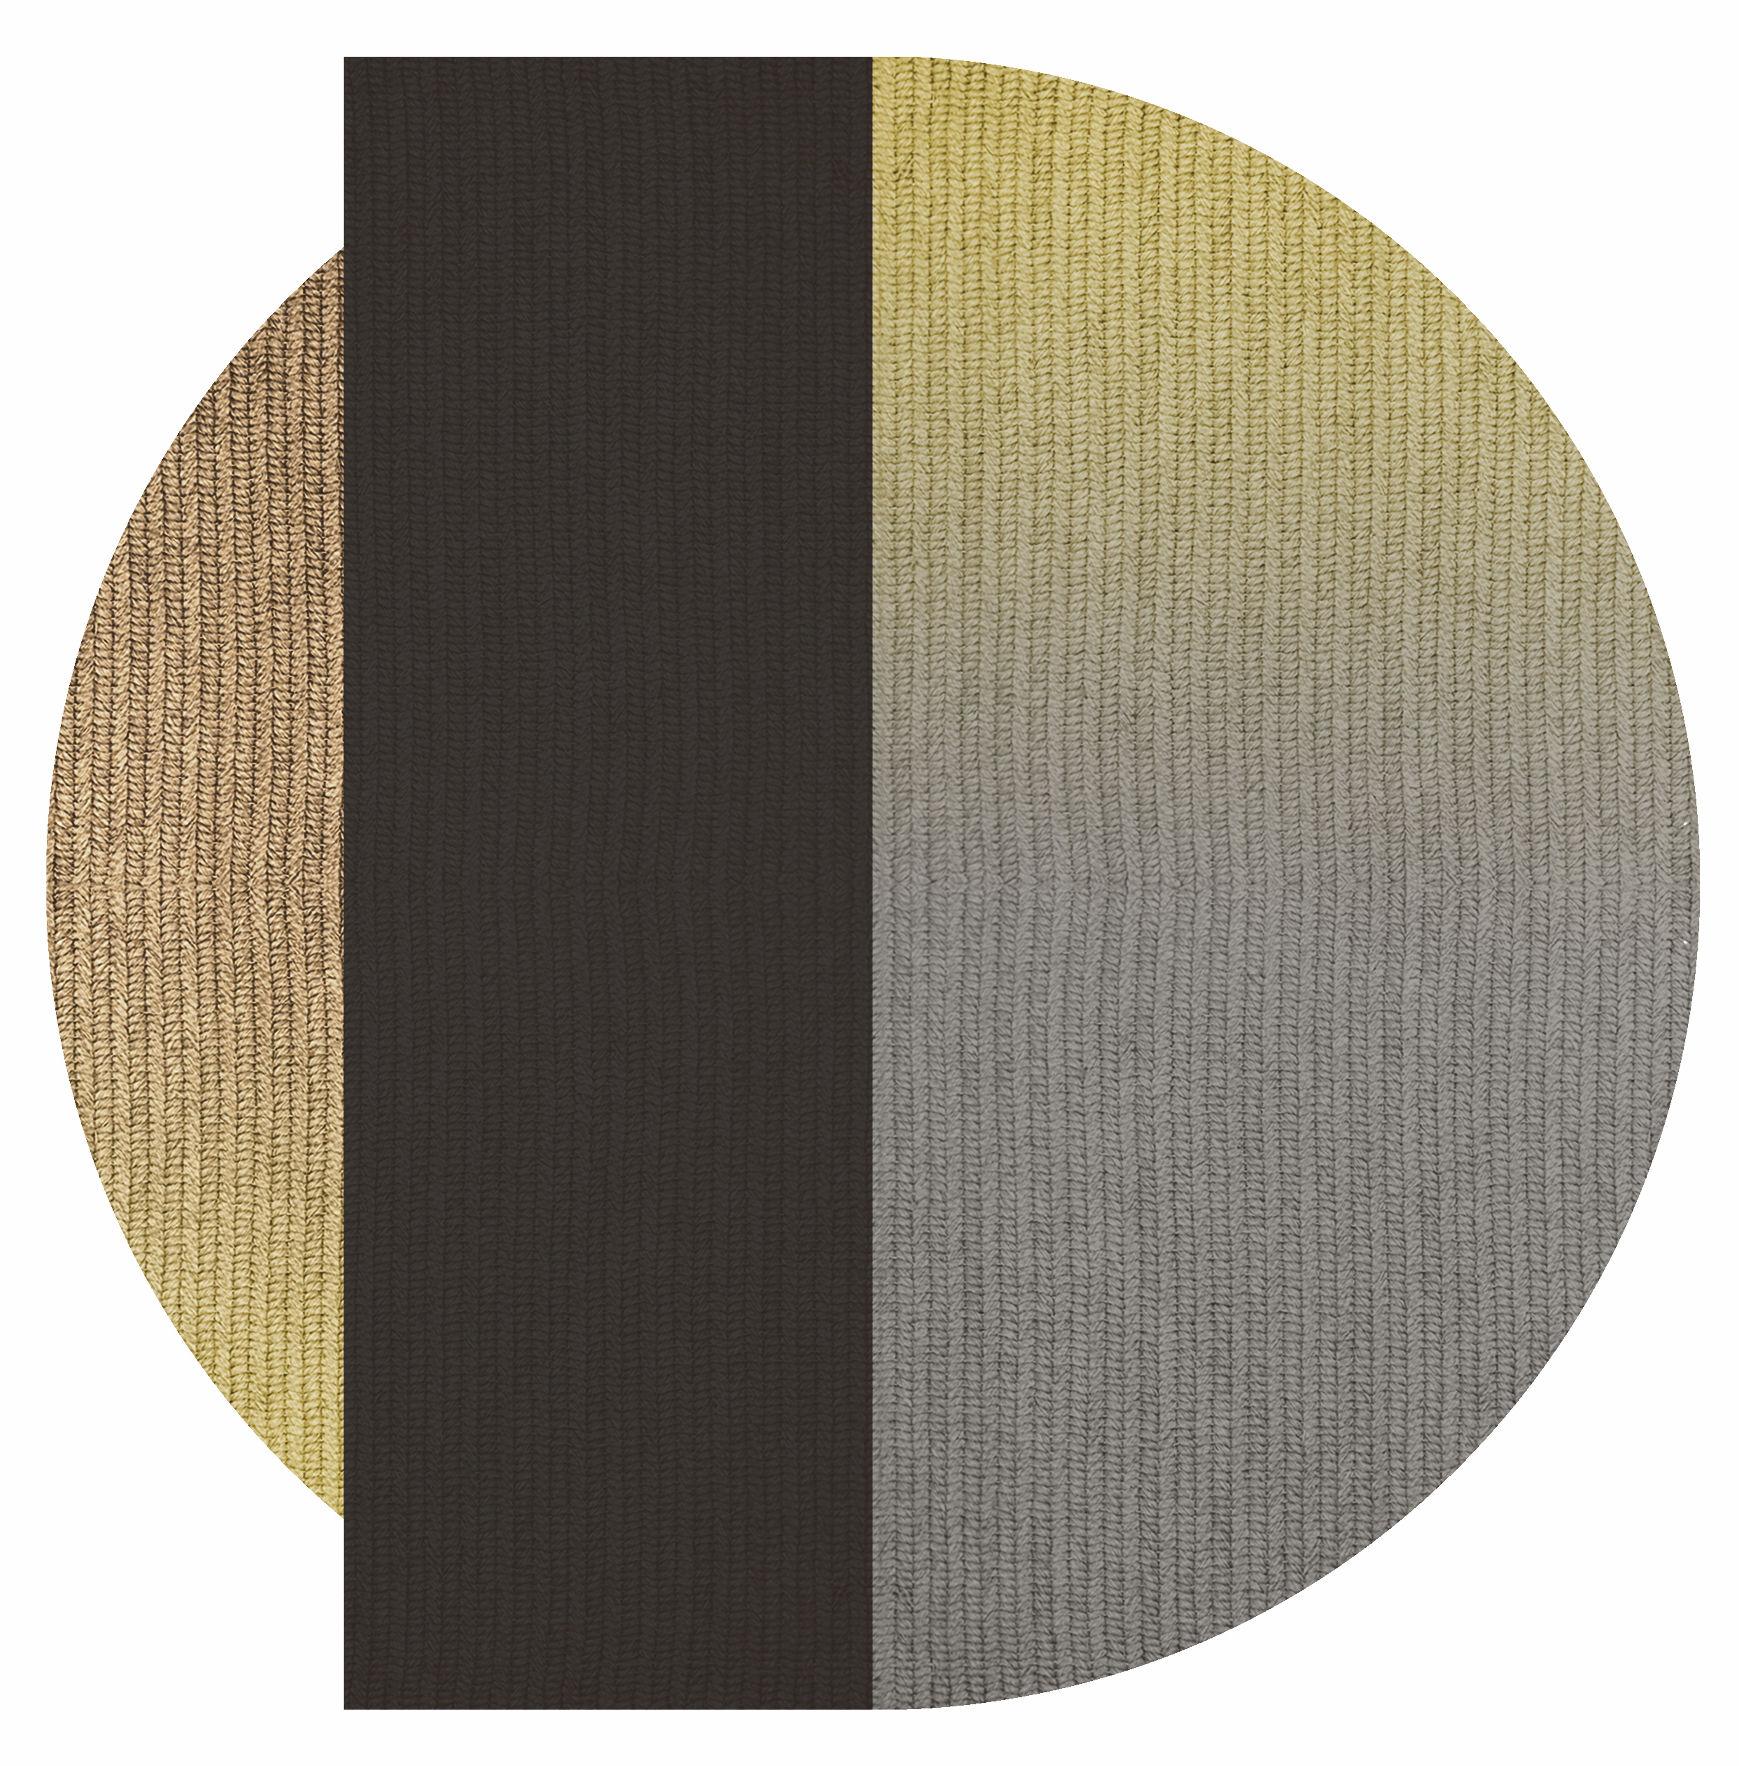 Philippine 'Flux' Rug in Abaca, Colour 'Pampas', by Claire Vos for Musett Design For Sale